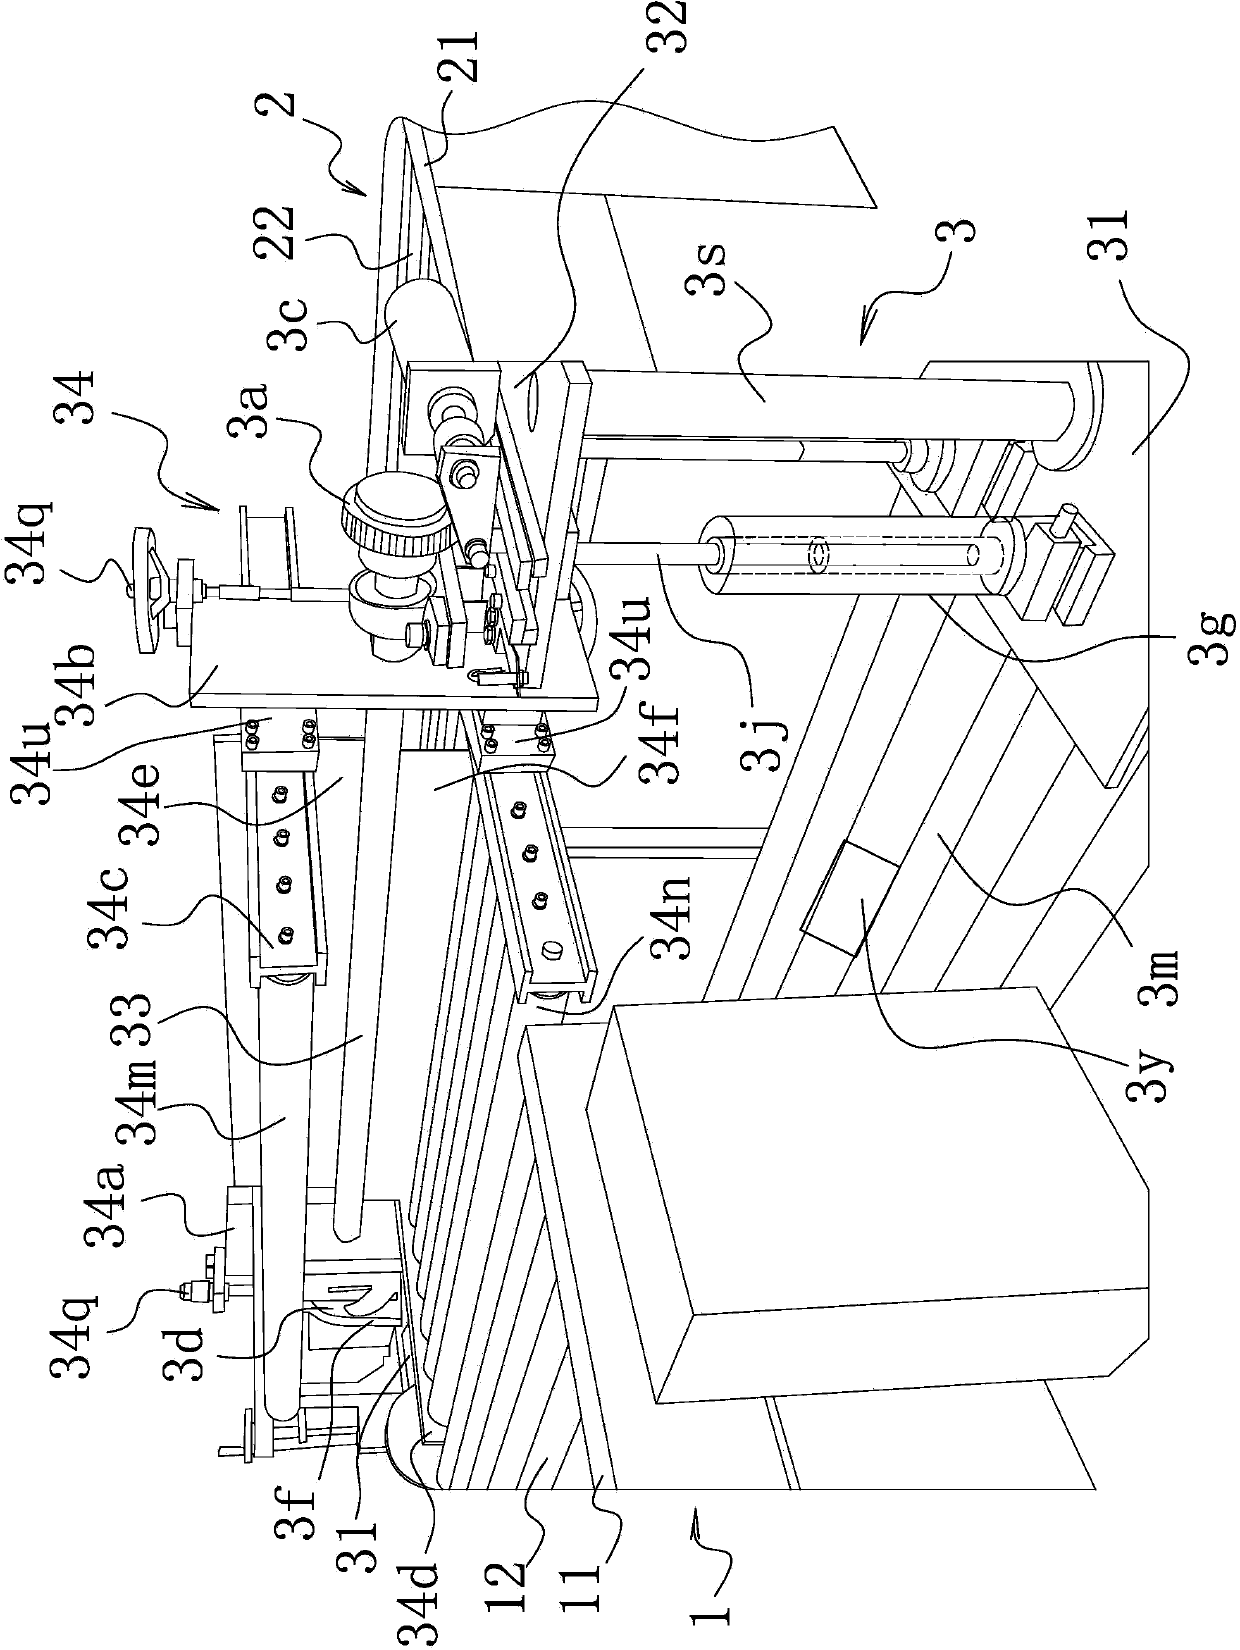 Conveying mechanism with turnover function